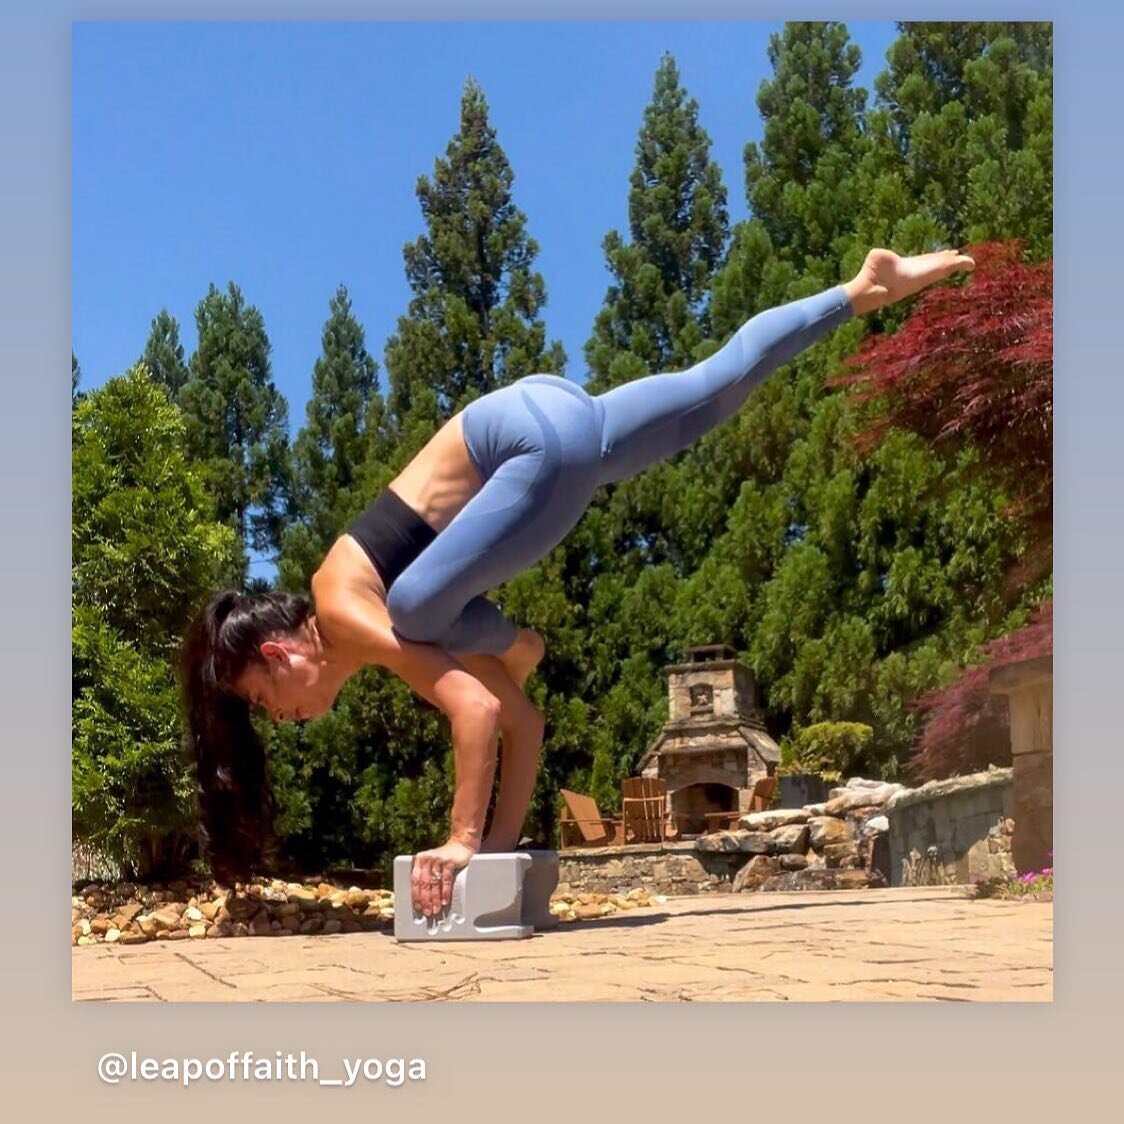 Another beautiful use of Wrist Buddy blocks by @leapoffaith_yoga !!🥰